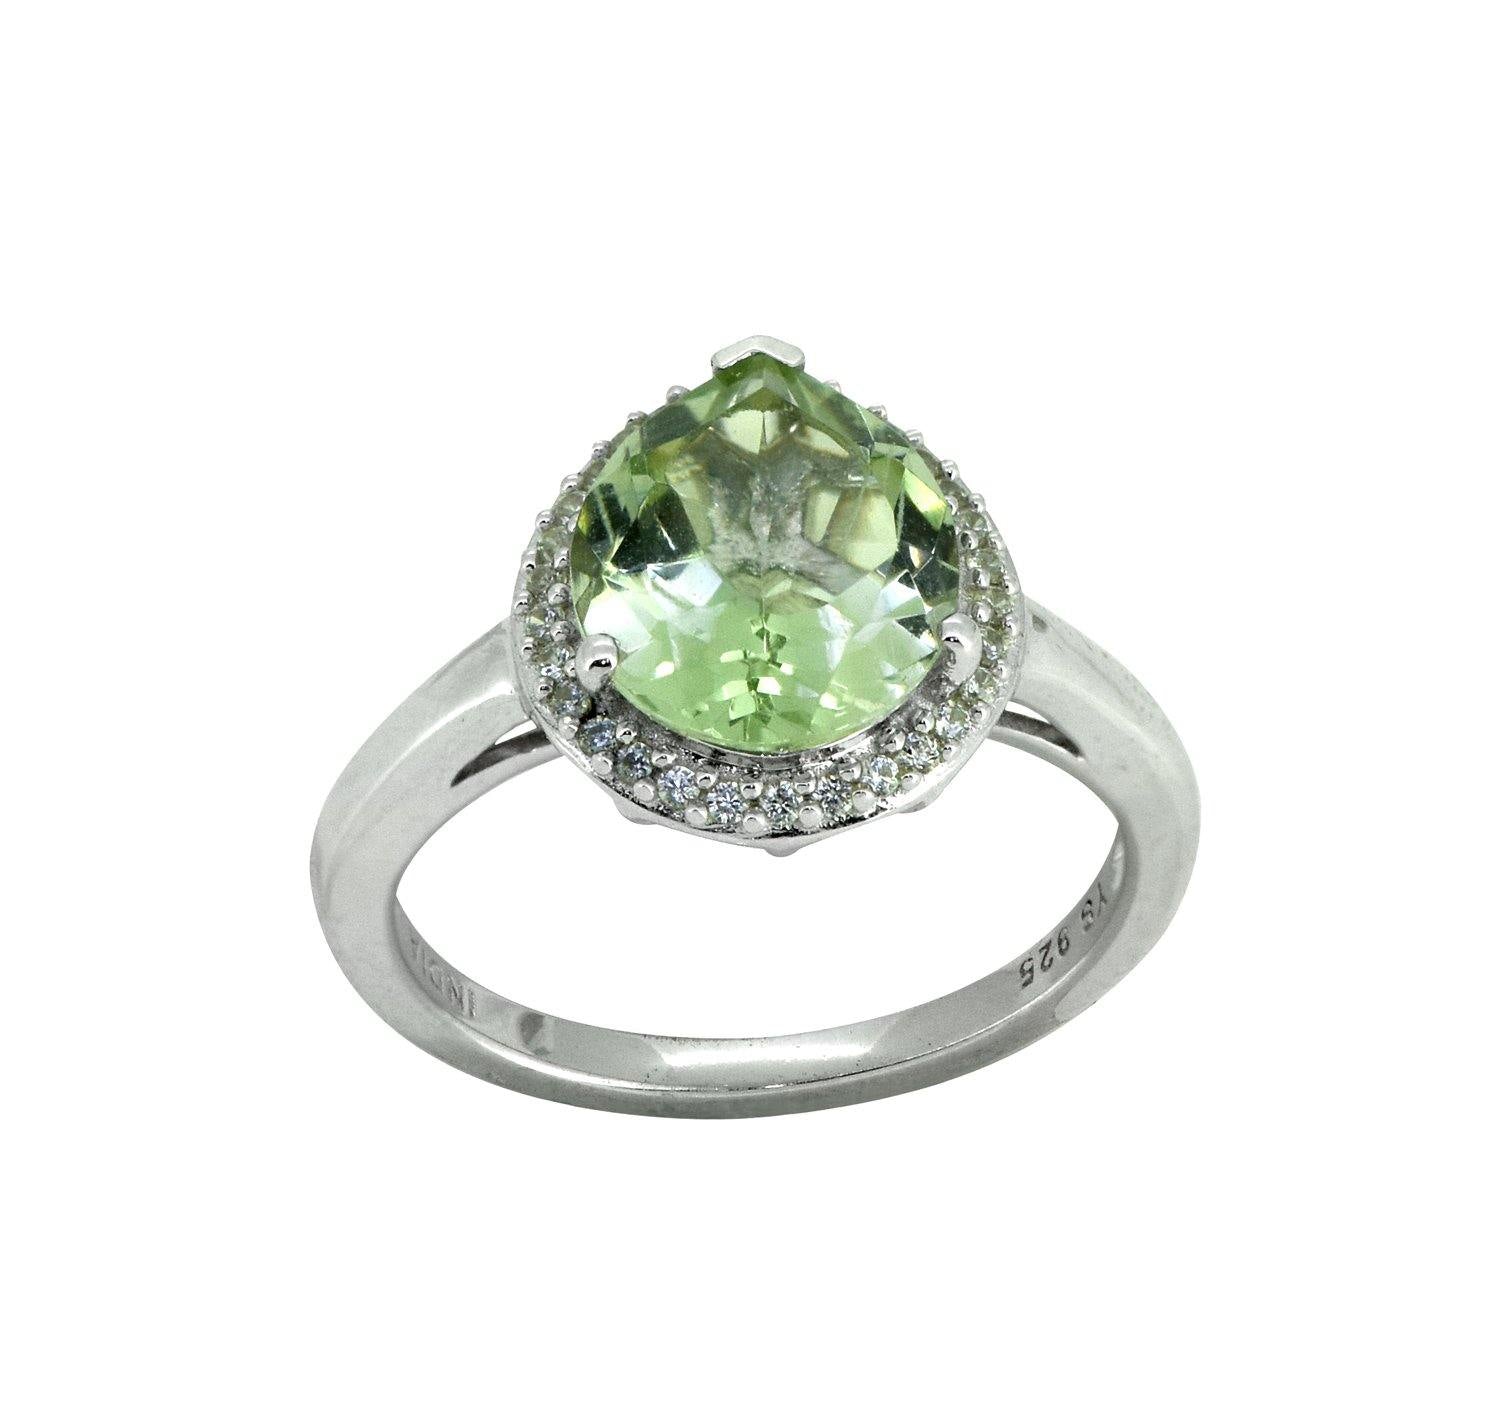 3.61 Ct Green Amethyst White Topaz Solid 925 Sterling Silver Ring Jewelry - YoTreasure